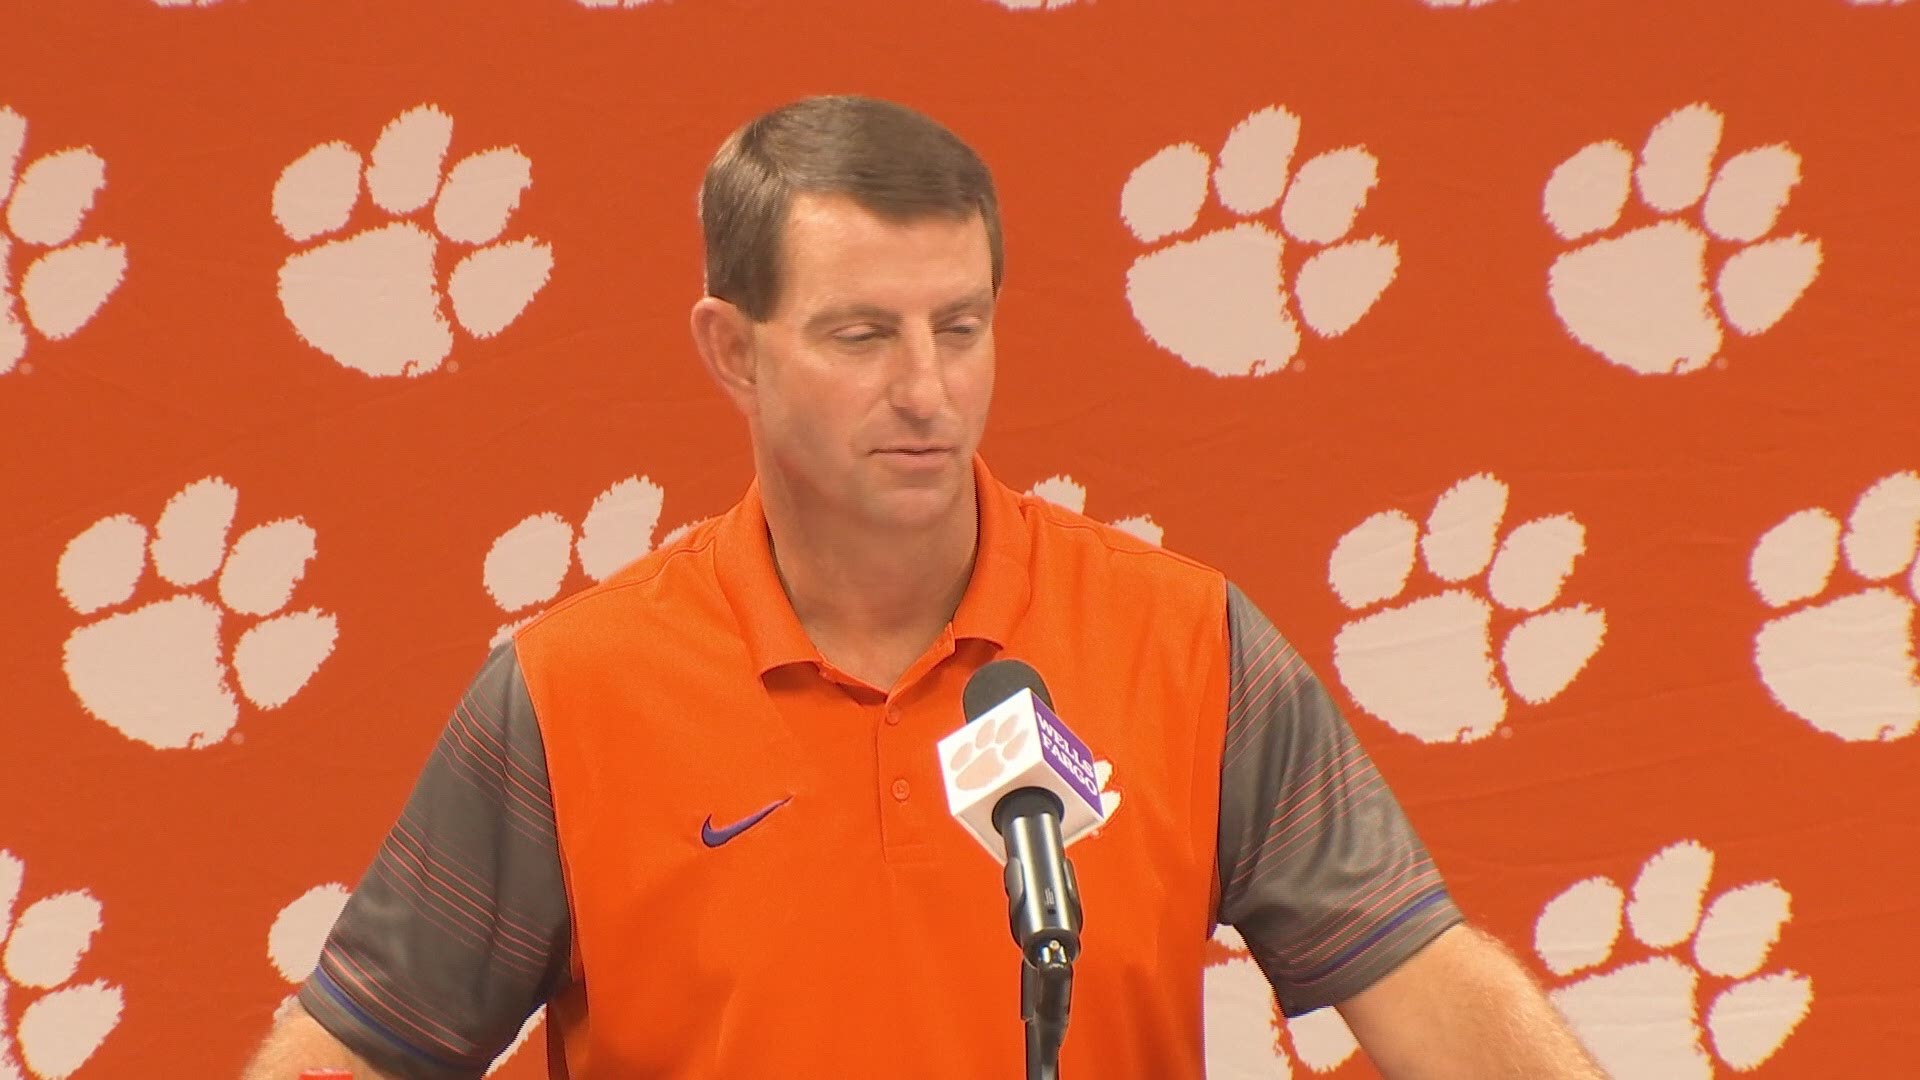 Clemson head coach Dabo Swinney goes in-depth about actual bulletin board material and where that term originated.